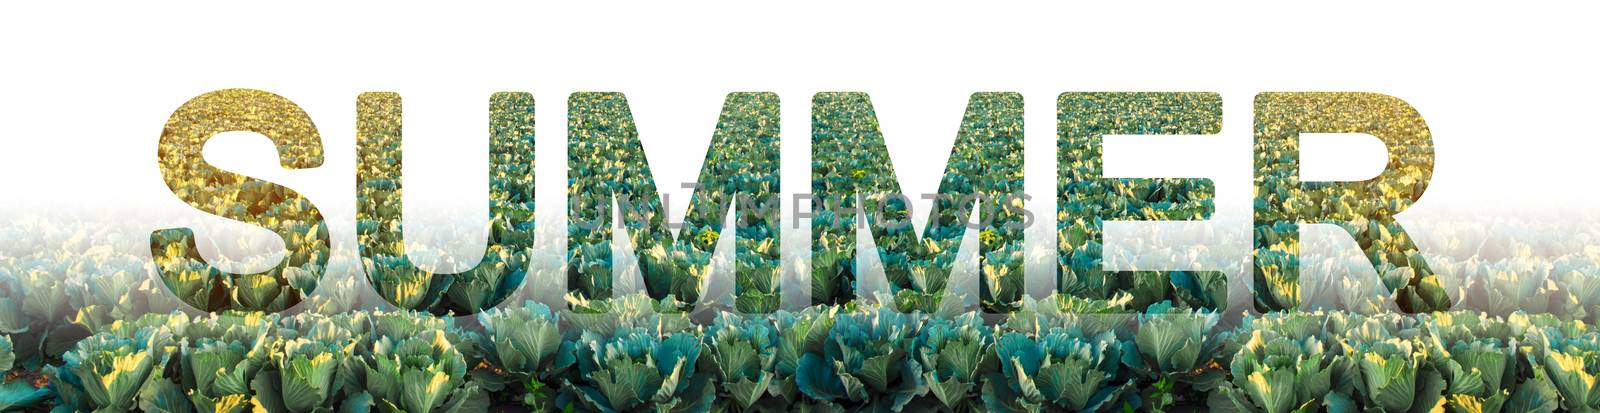 The word summer on the background of cabbage plantation. Winter crops. Season of the year, active phase of growing, harvesting. Time to stock up on vitamins, improve your health. Vacations